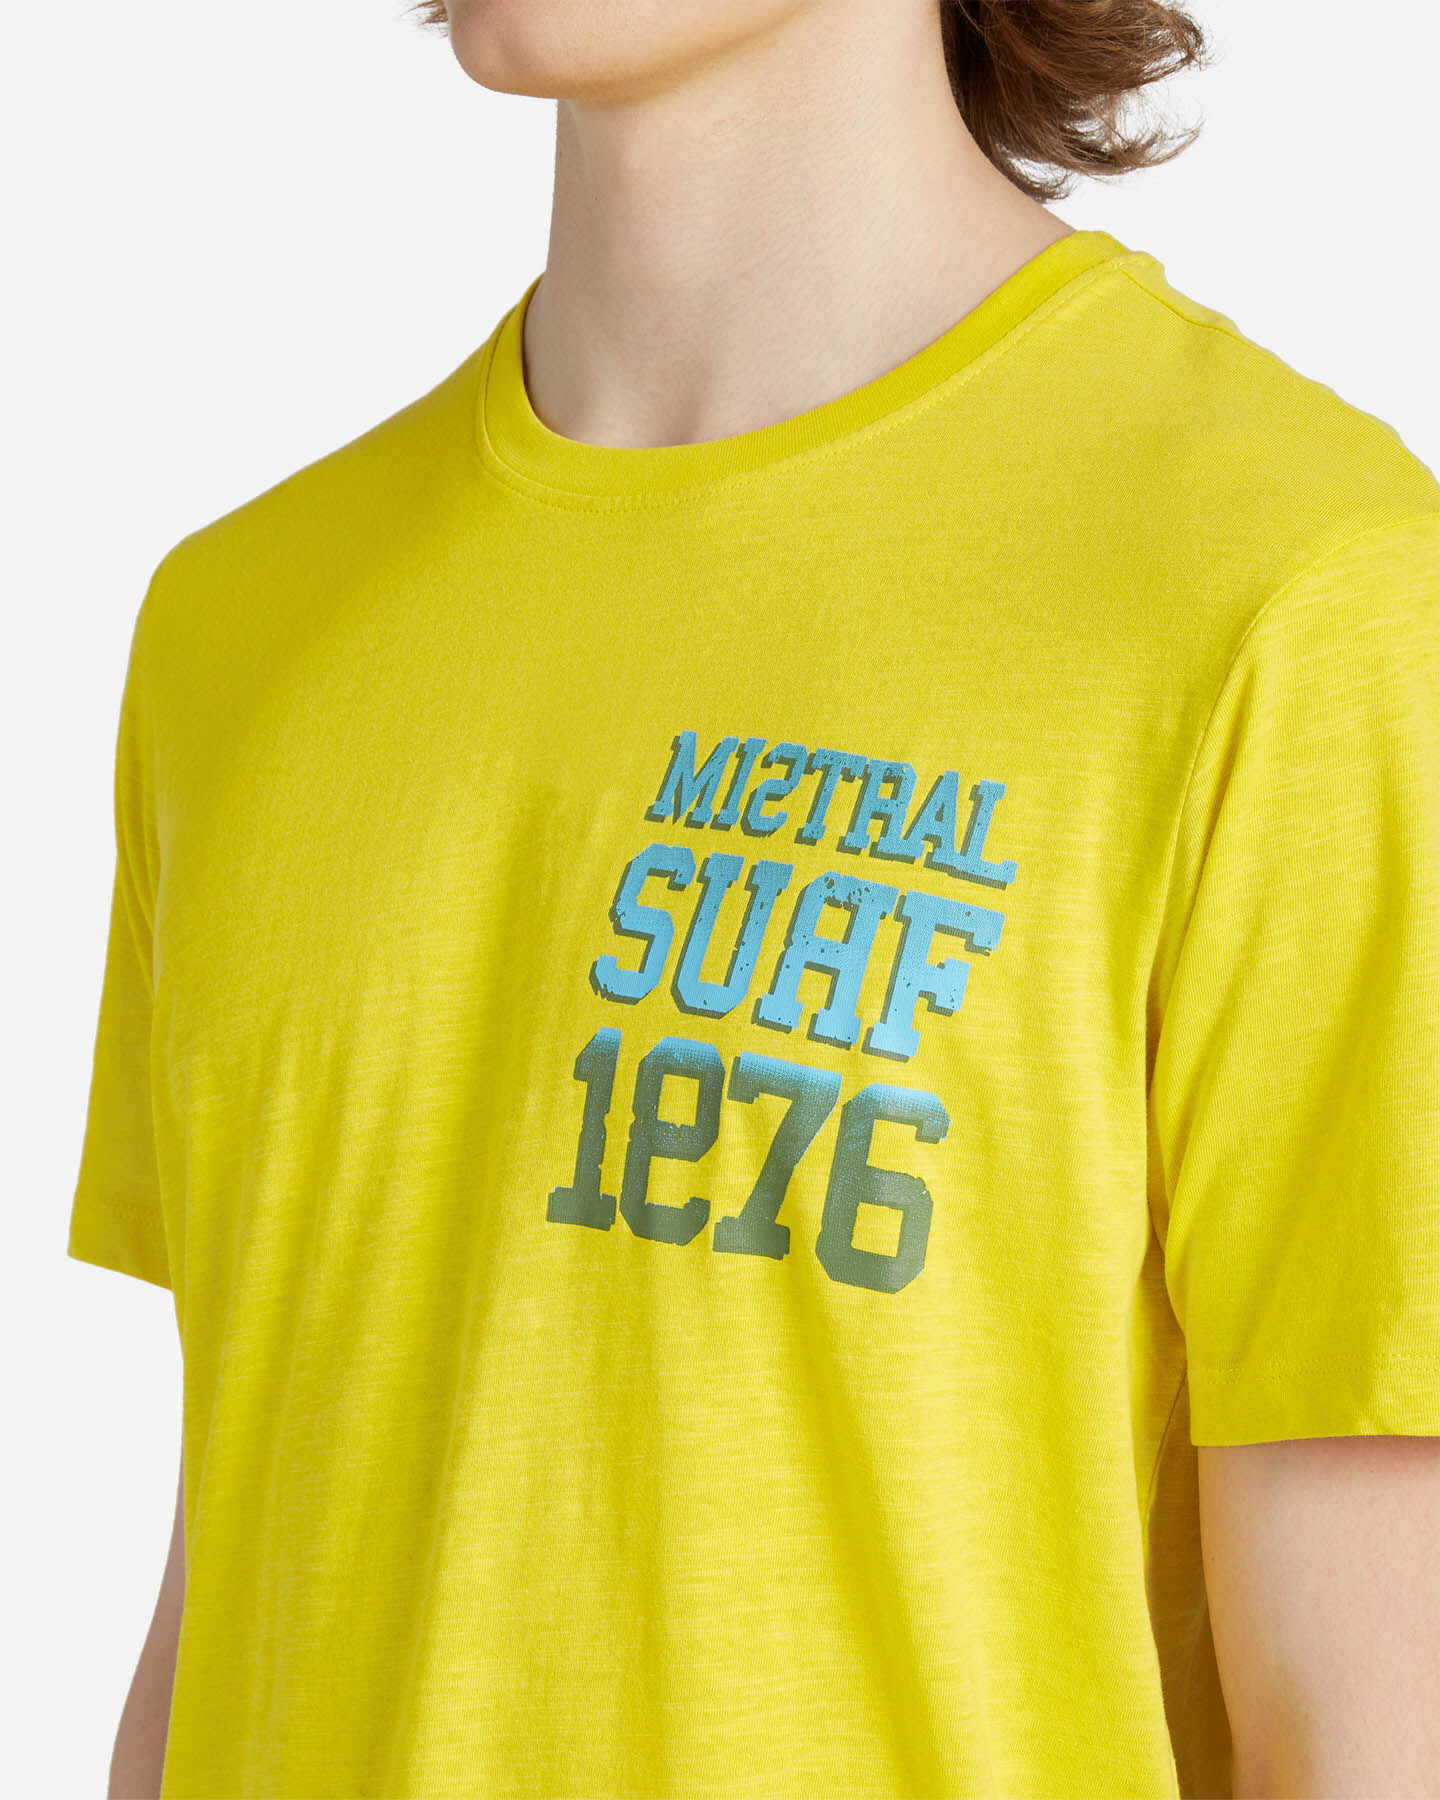  T-Shirt MISTRAL SURF 1976 M S4102910 scatto 4